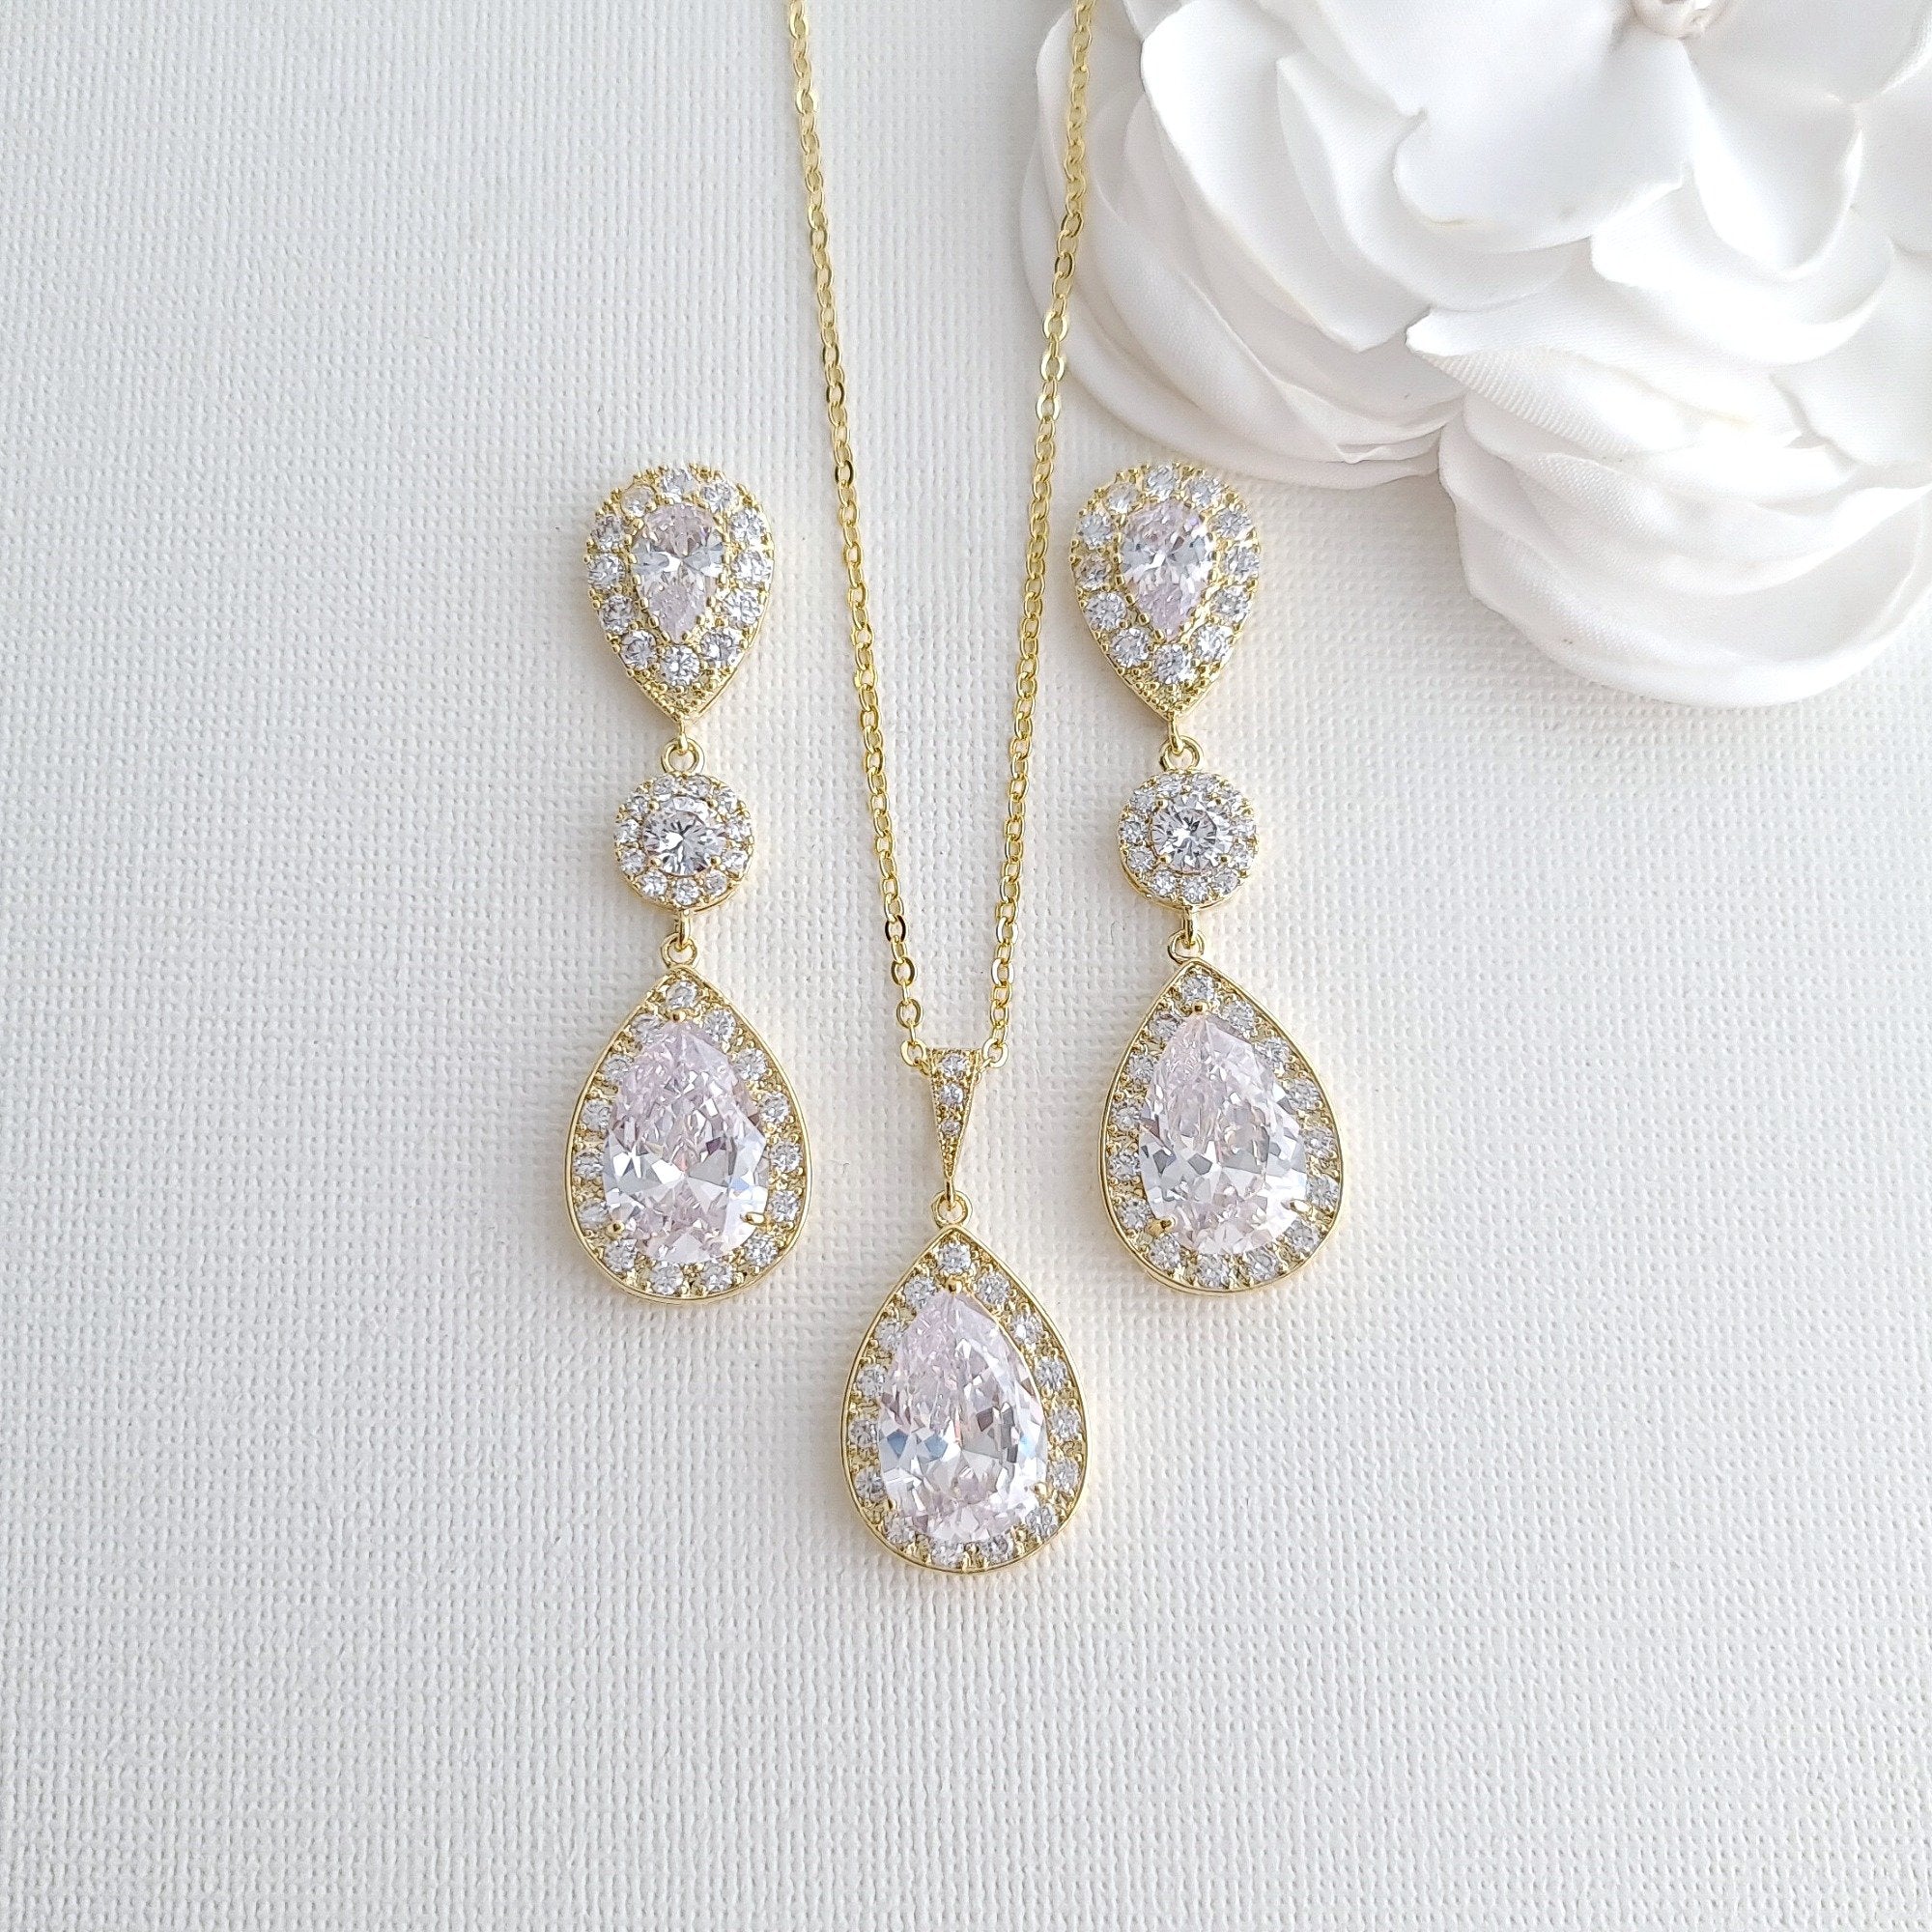 Simple Cubic Zirconia Necklace Set with Long CZ Earrings for Wedding- Penelope